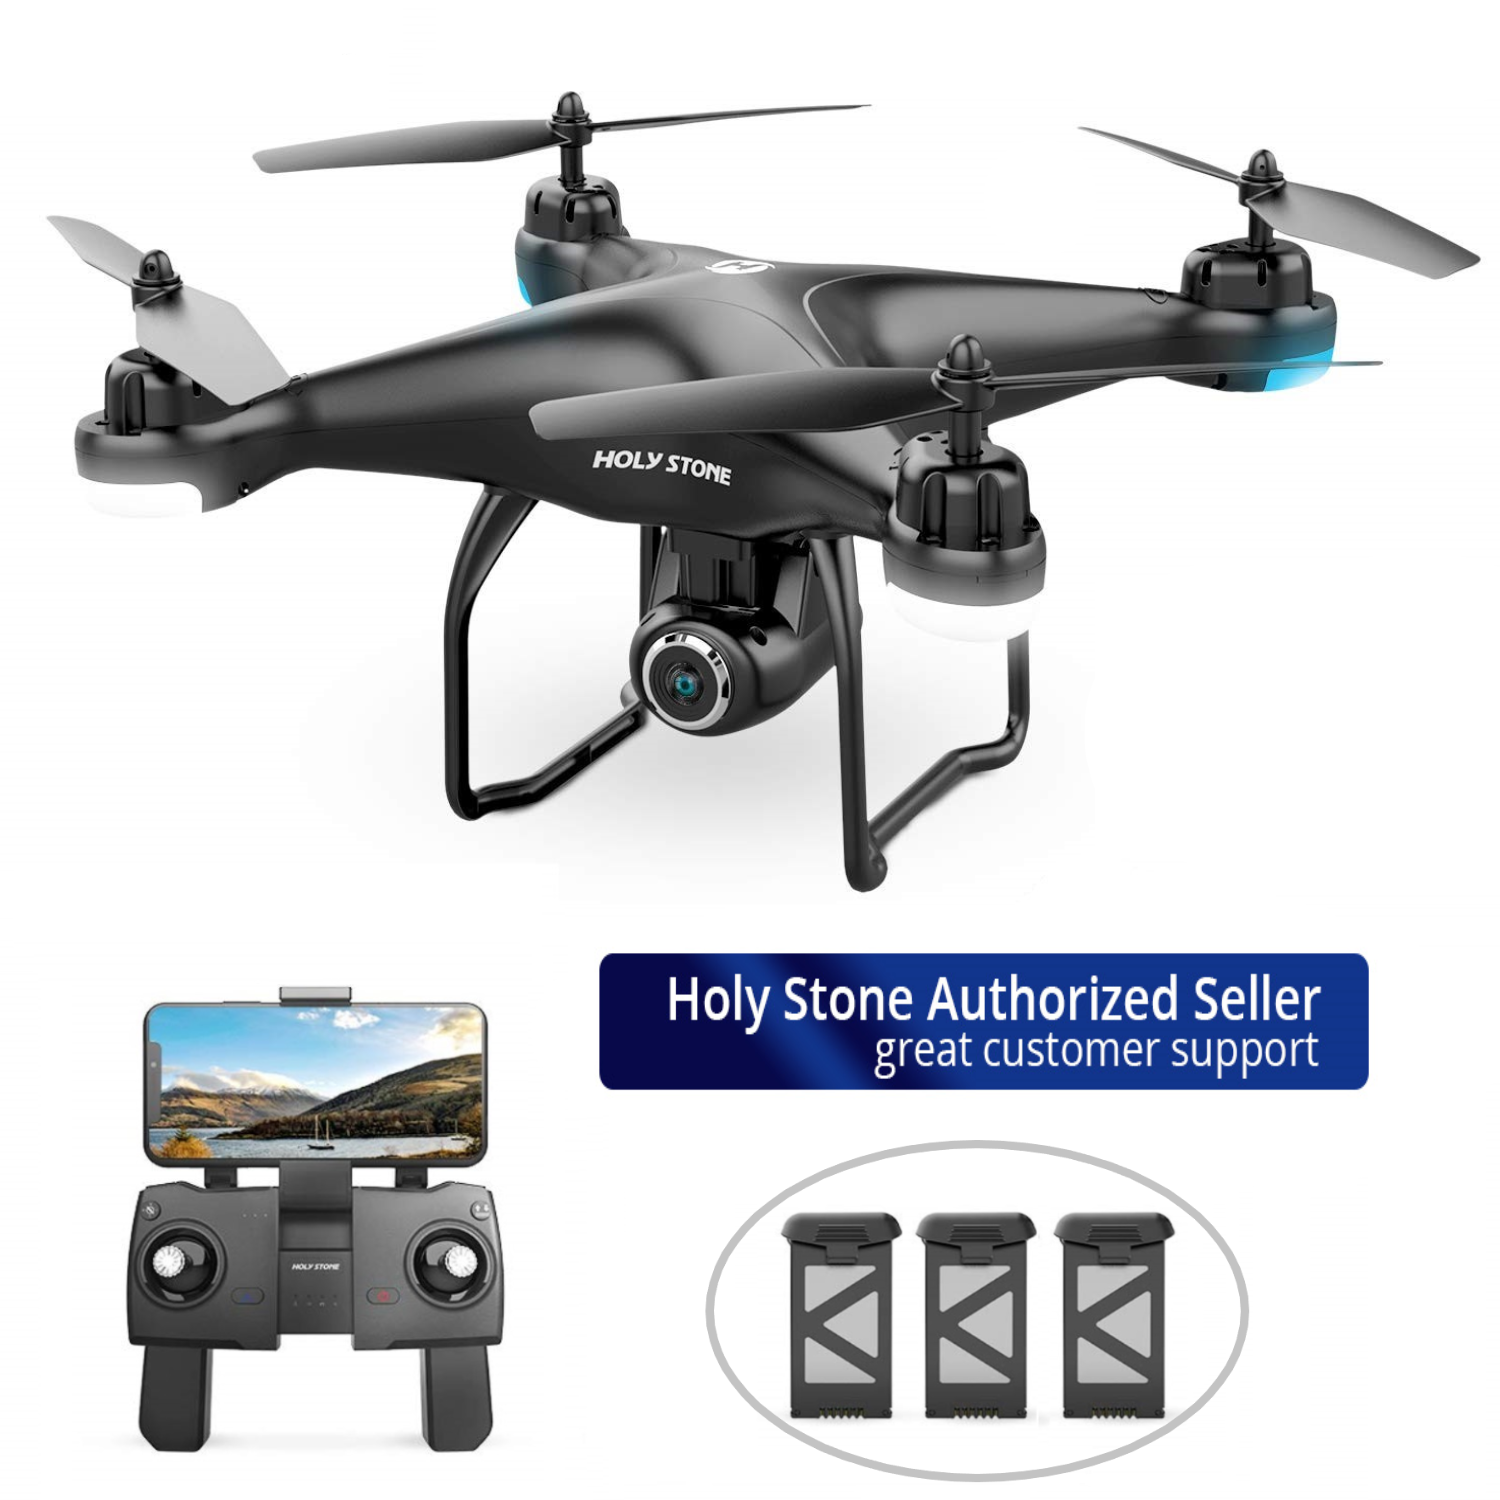 Holy Stone Hs1d 1080p Hd Camera Fpv Drone Gps Rc Selfie Quadcopter 3 Battery Ebay